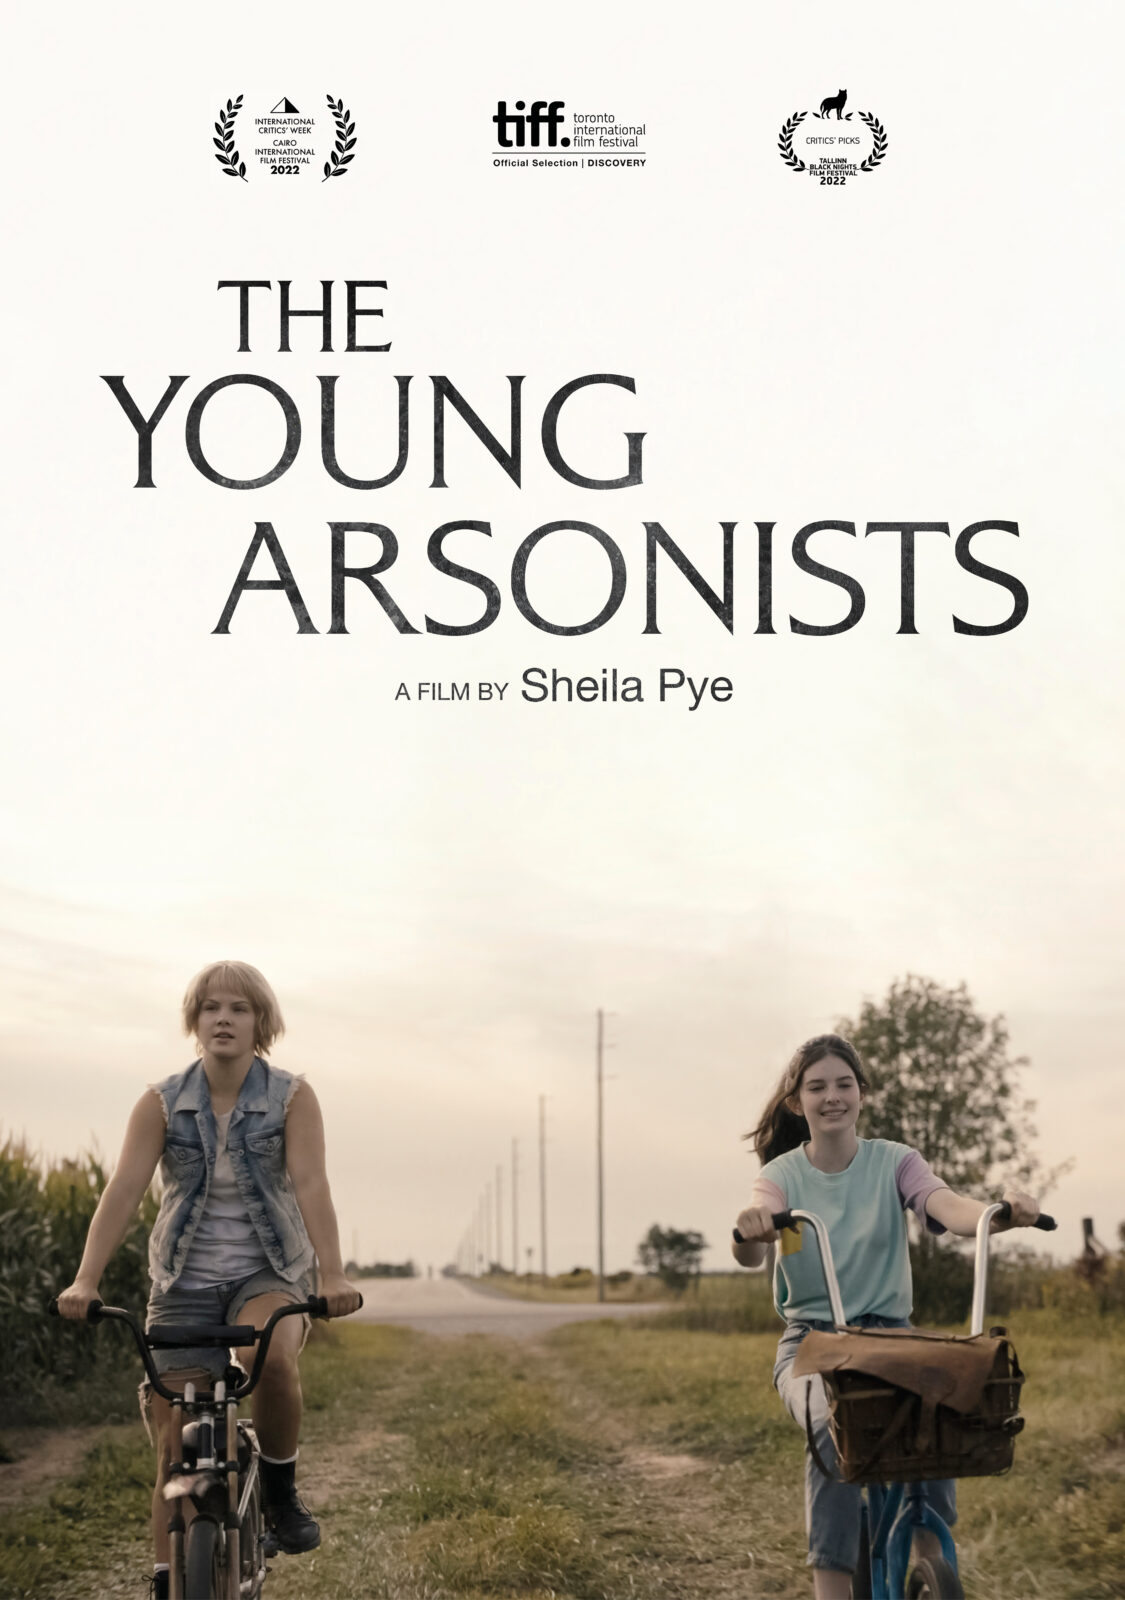 THE YOUNG ARSONISTS - Latido Films